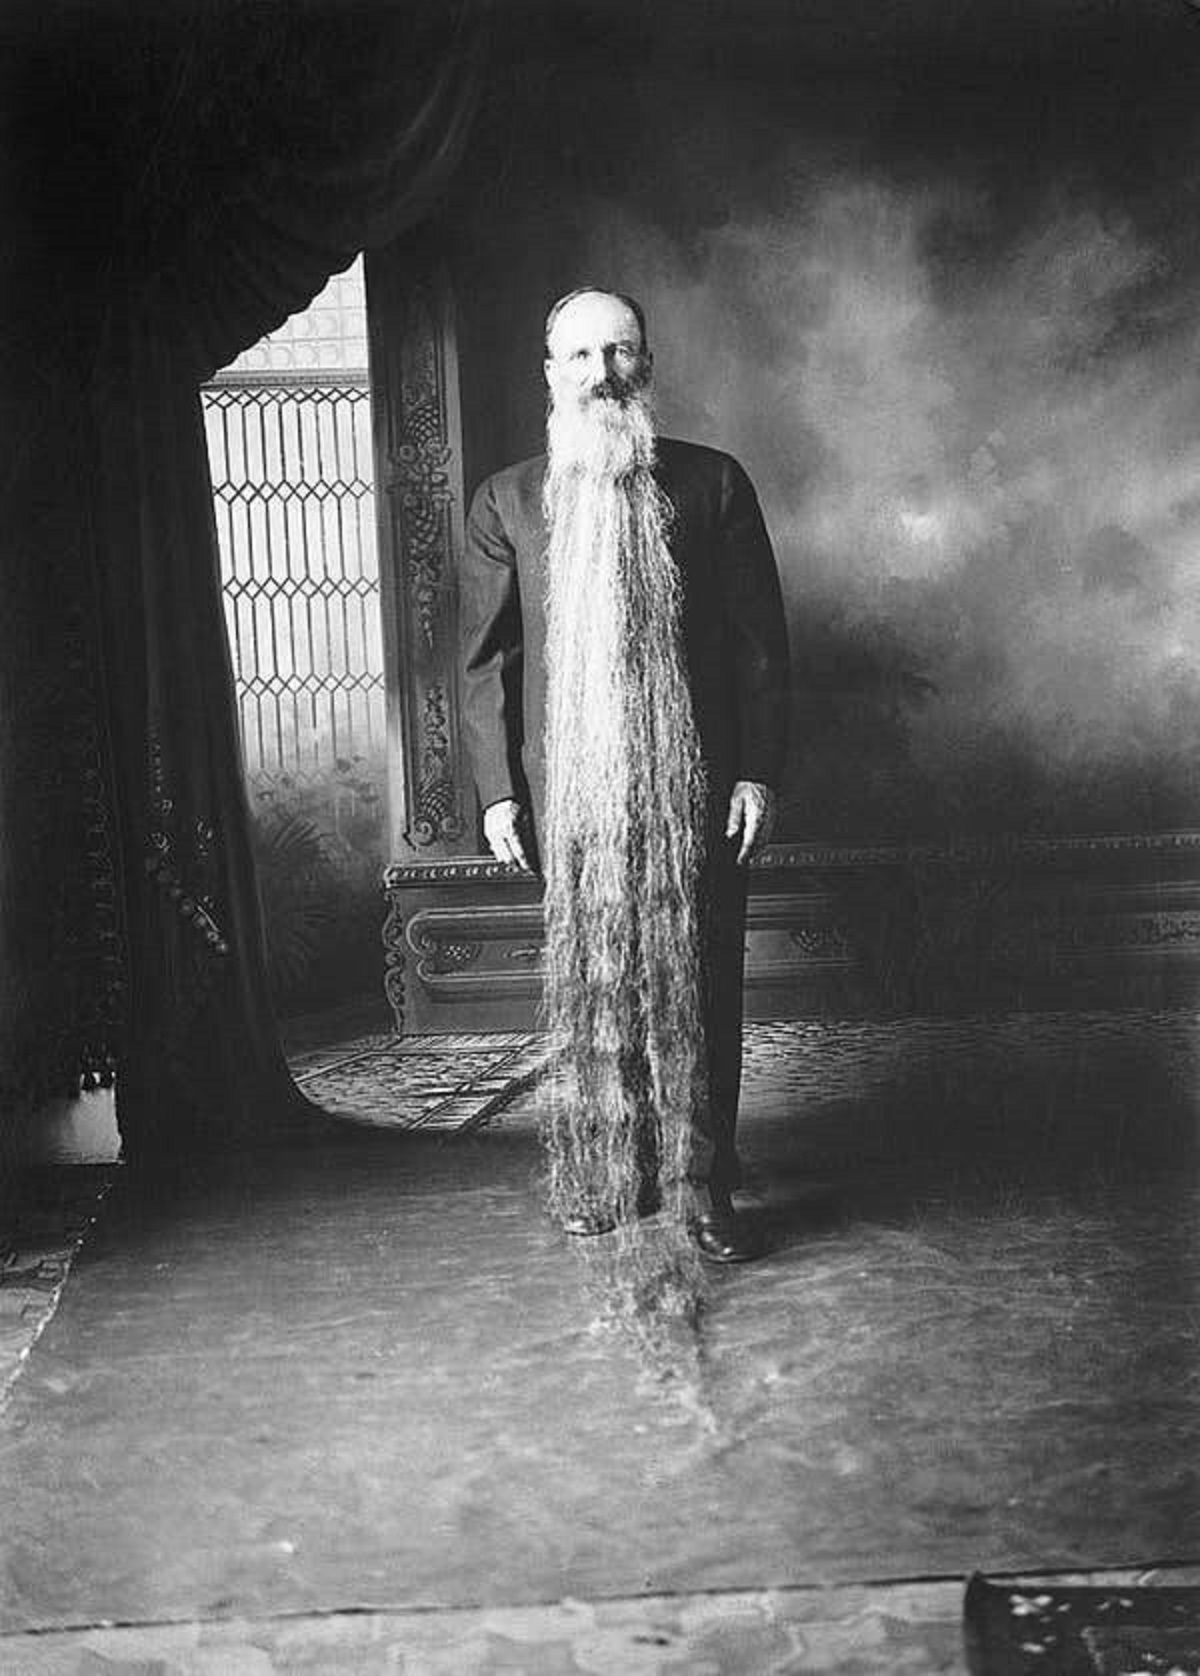 This bad boy is Zach T. Wilcox, owner of the world's longest beard in 1922: